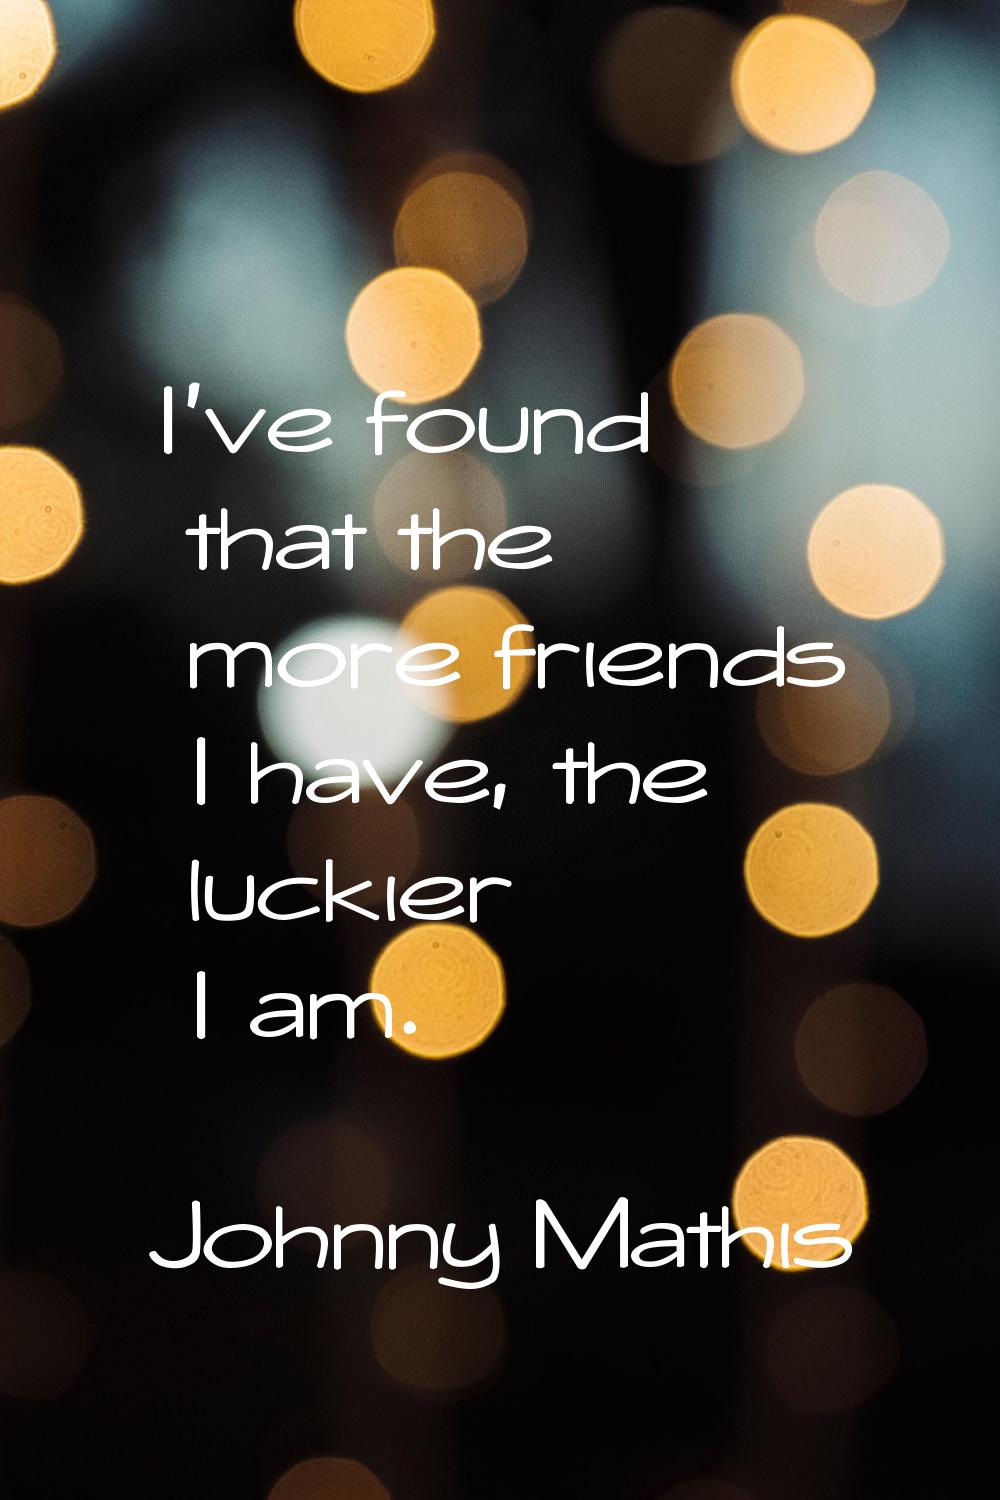 I've found that the more friends I have, the luckier I am.